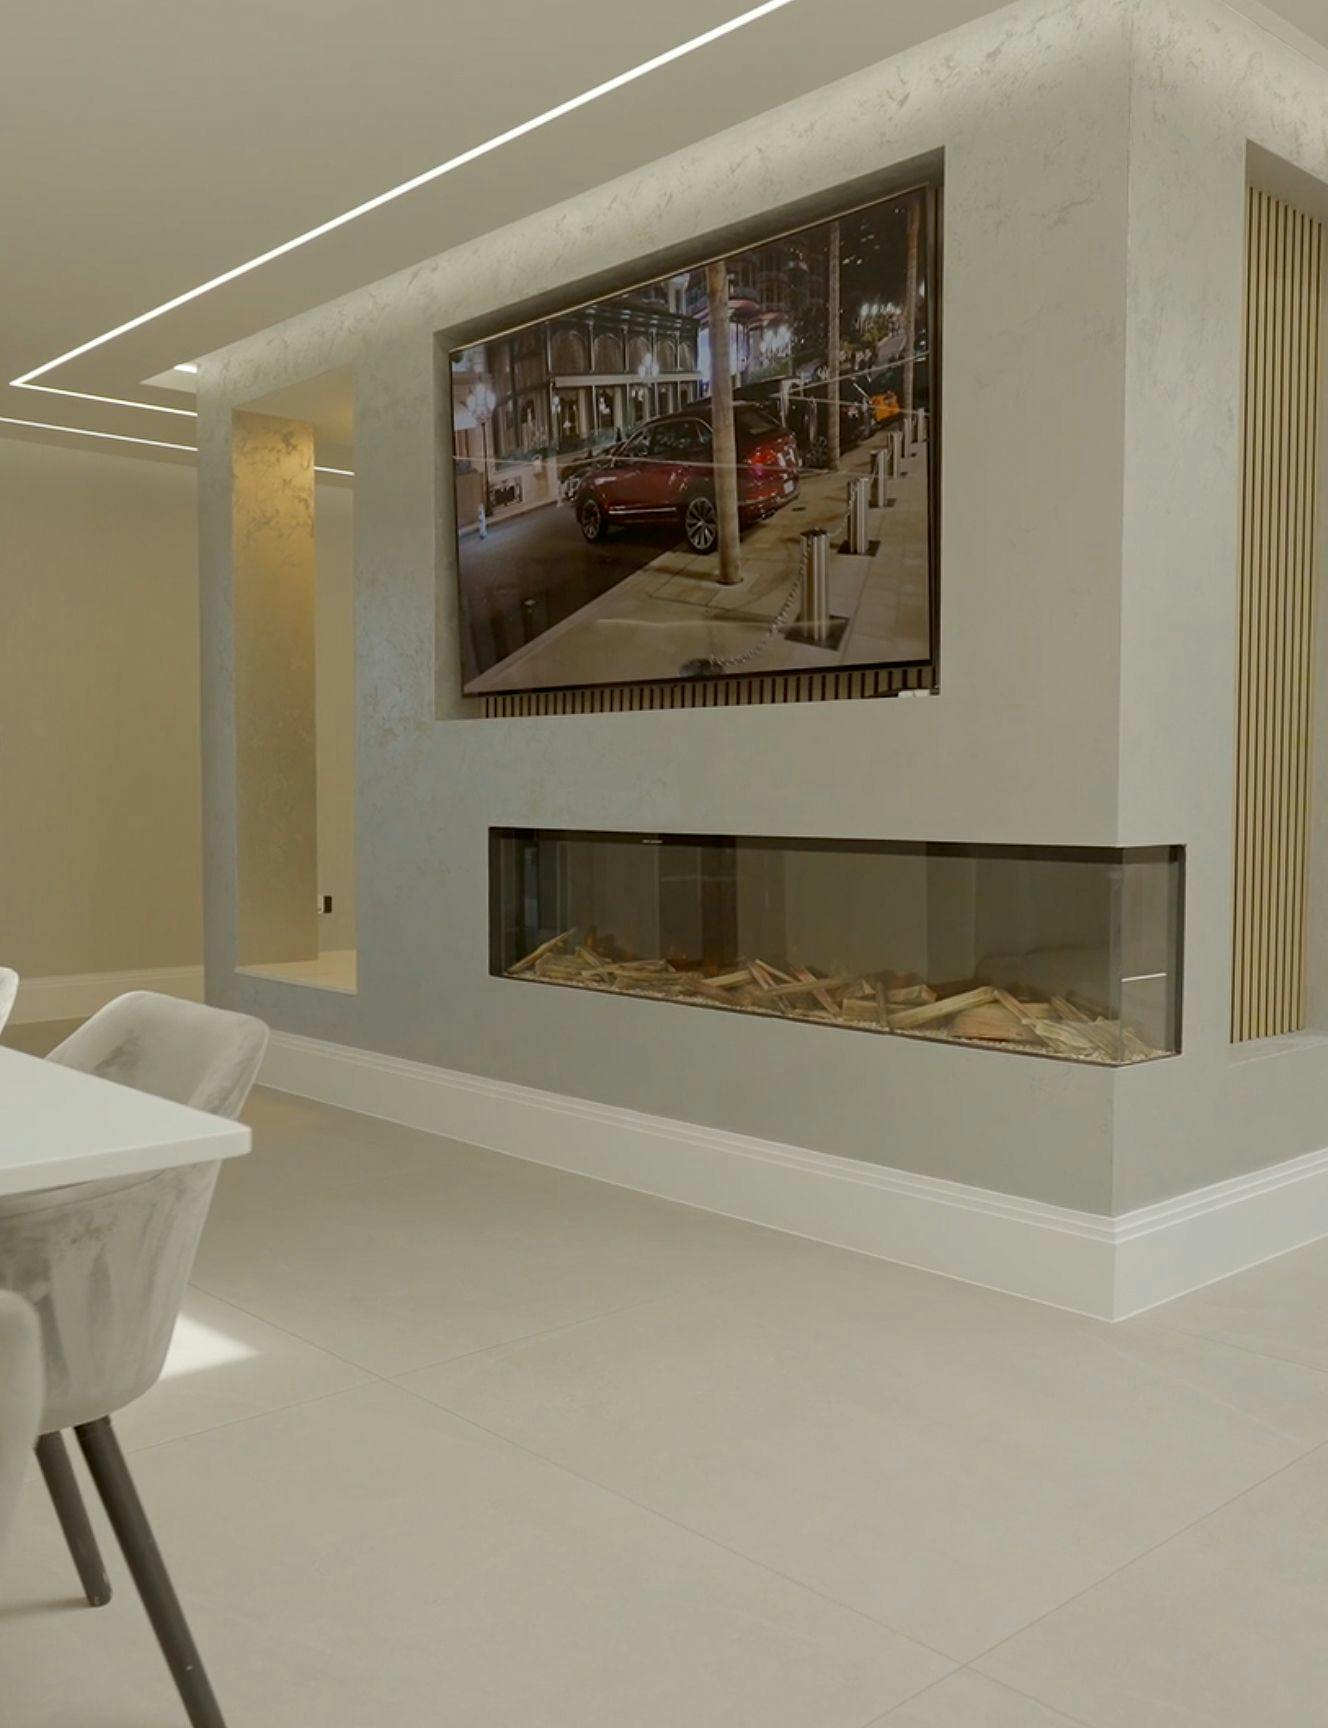 Inspirational fireplace in a home